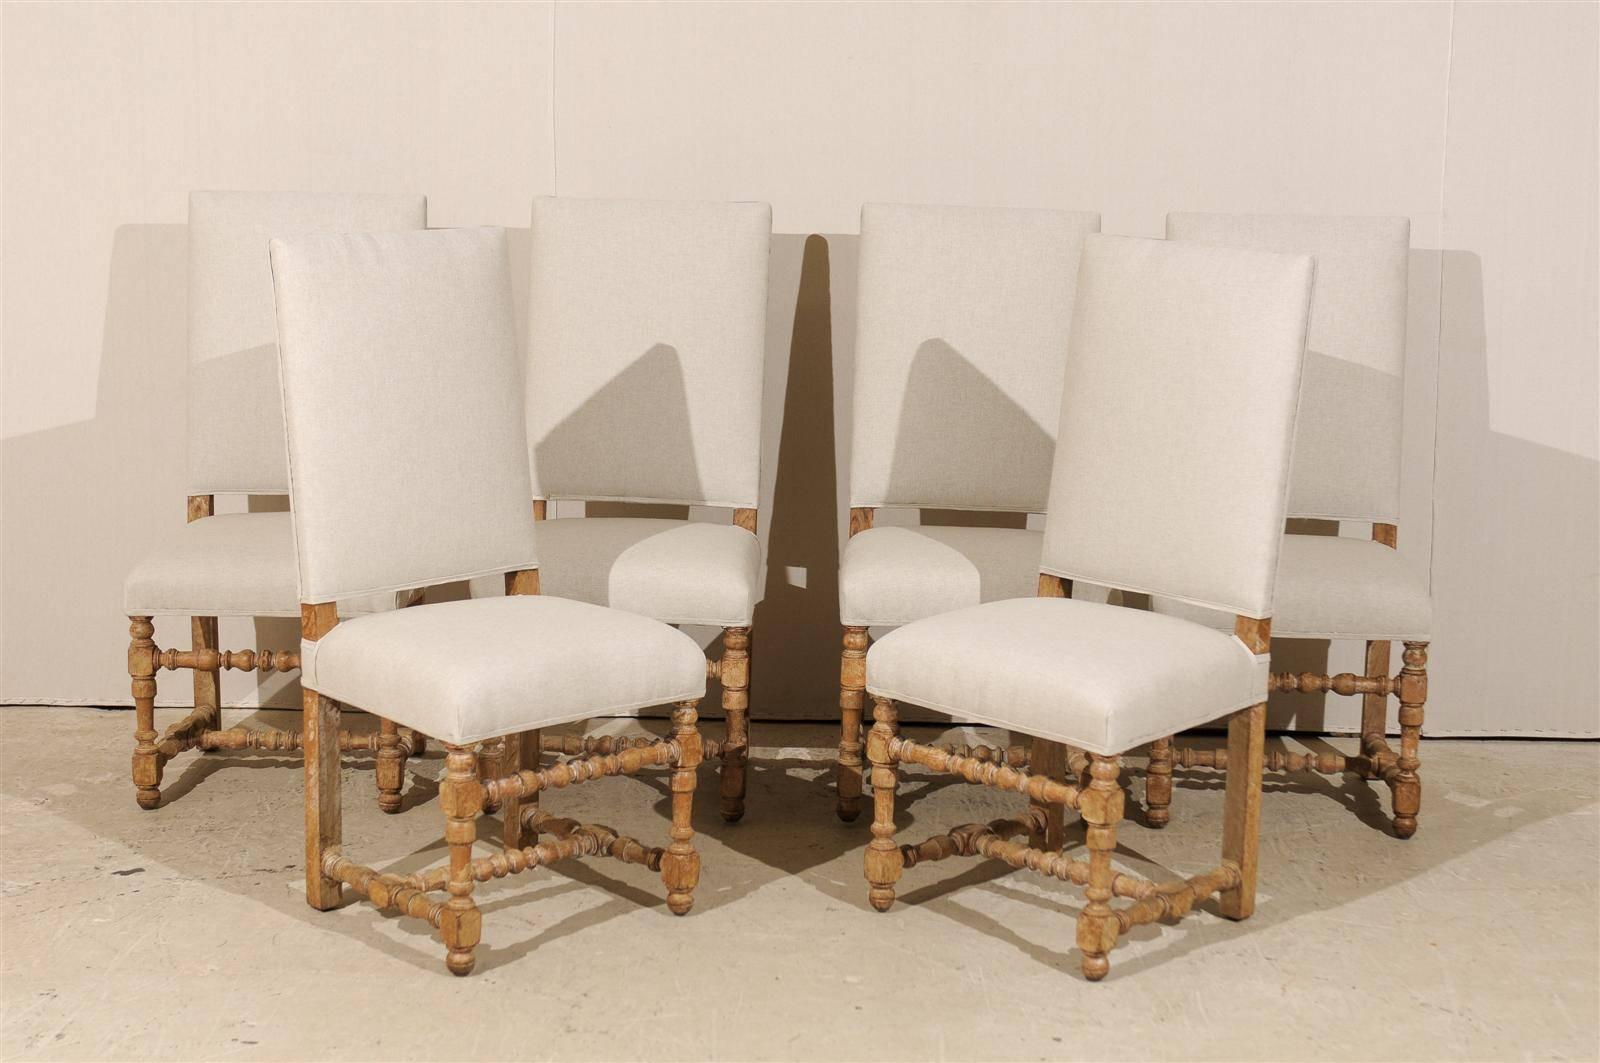 A set of six exquisite Italian late 19th century baroque style side chairs. This set of reupholstered Italian chairs features nice front turned legs and stretchers. The back is slanted. They have been scraped down and show traces of their original